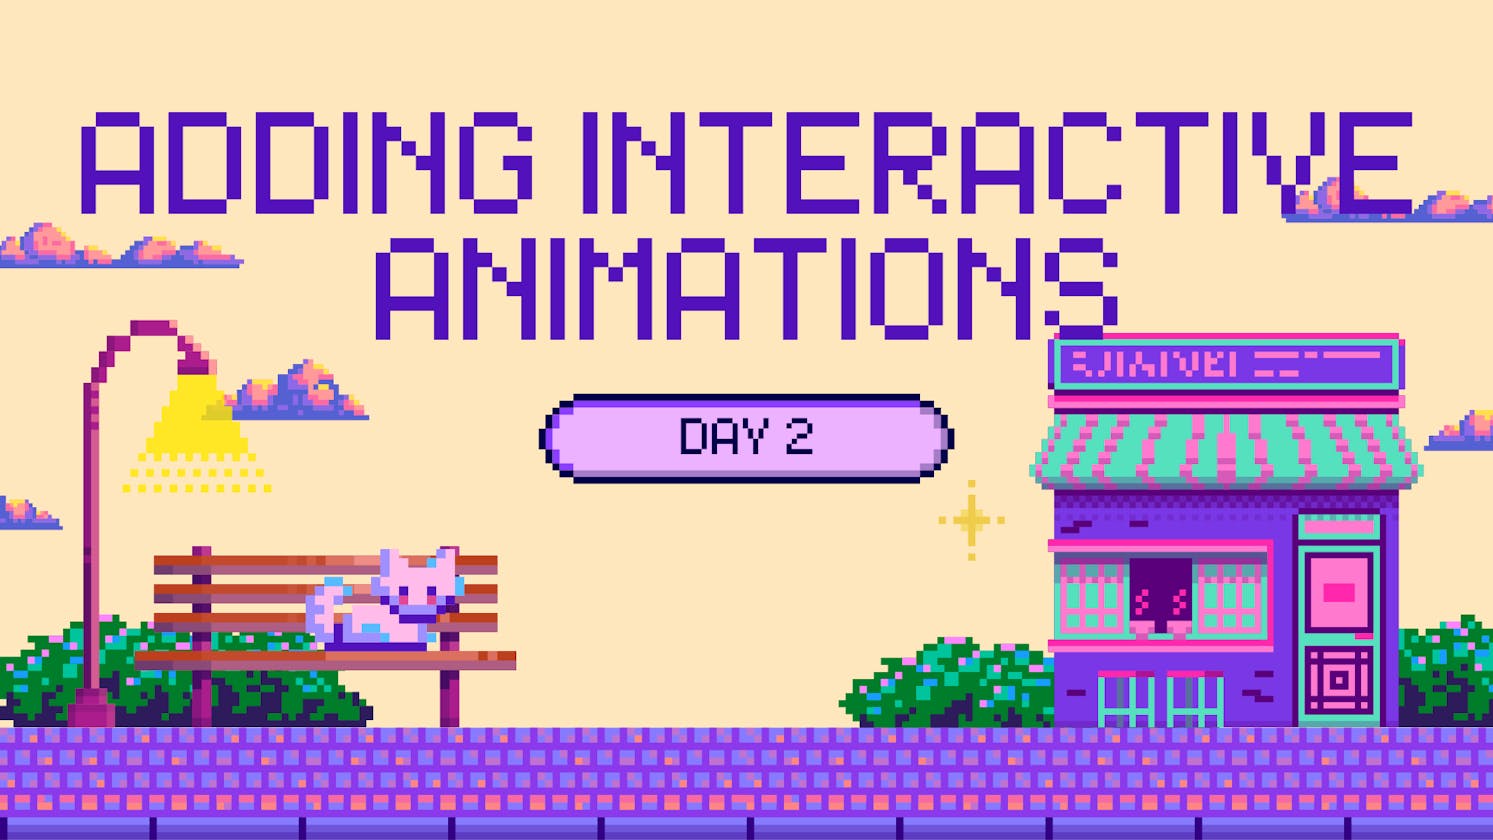 Adding interactive animations: Day 2